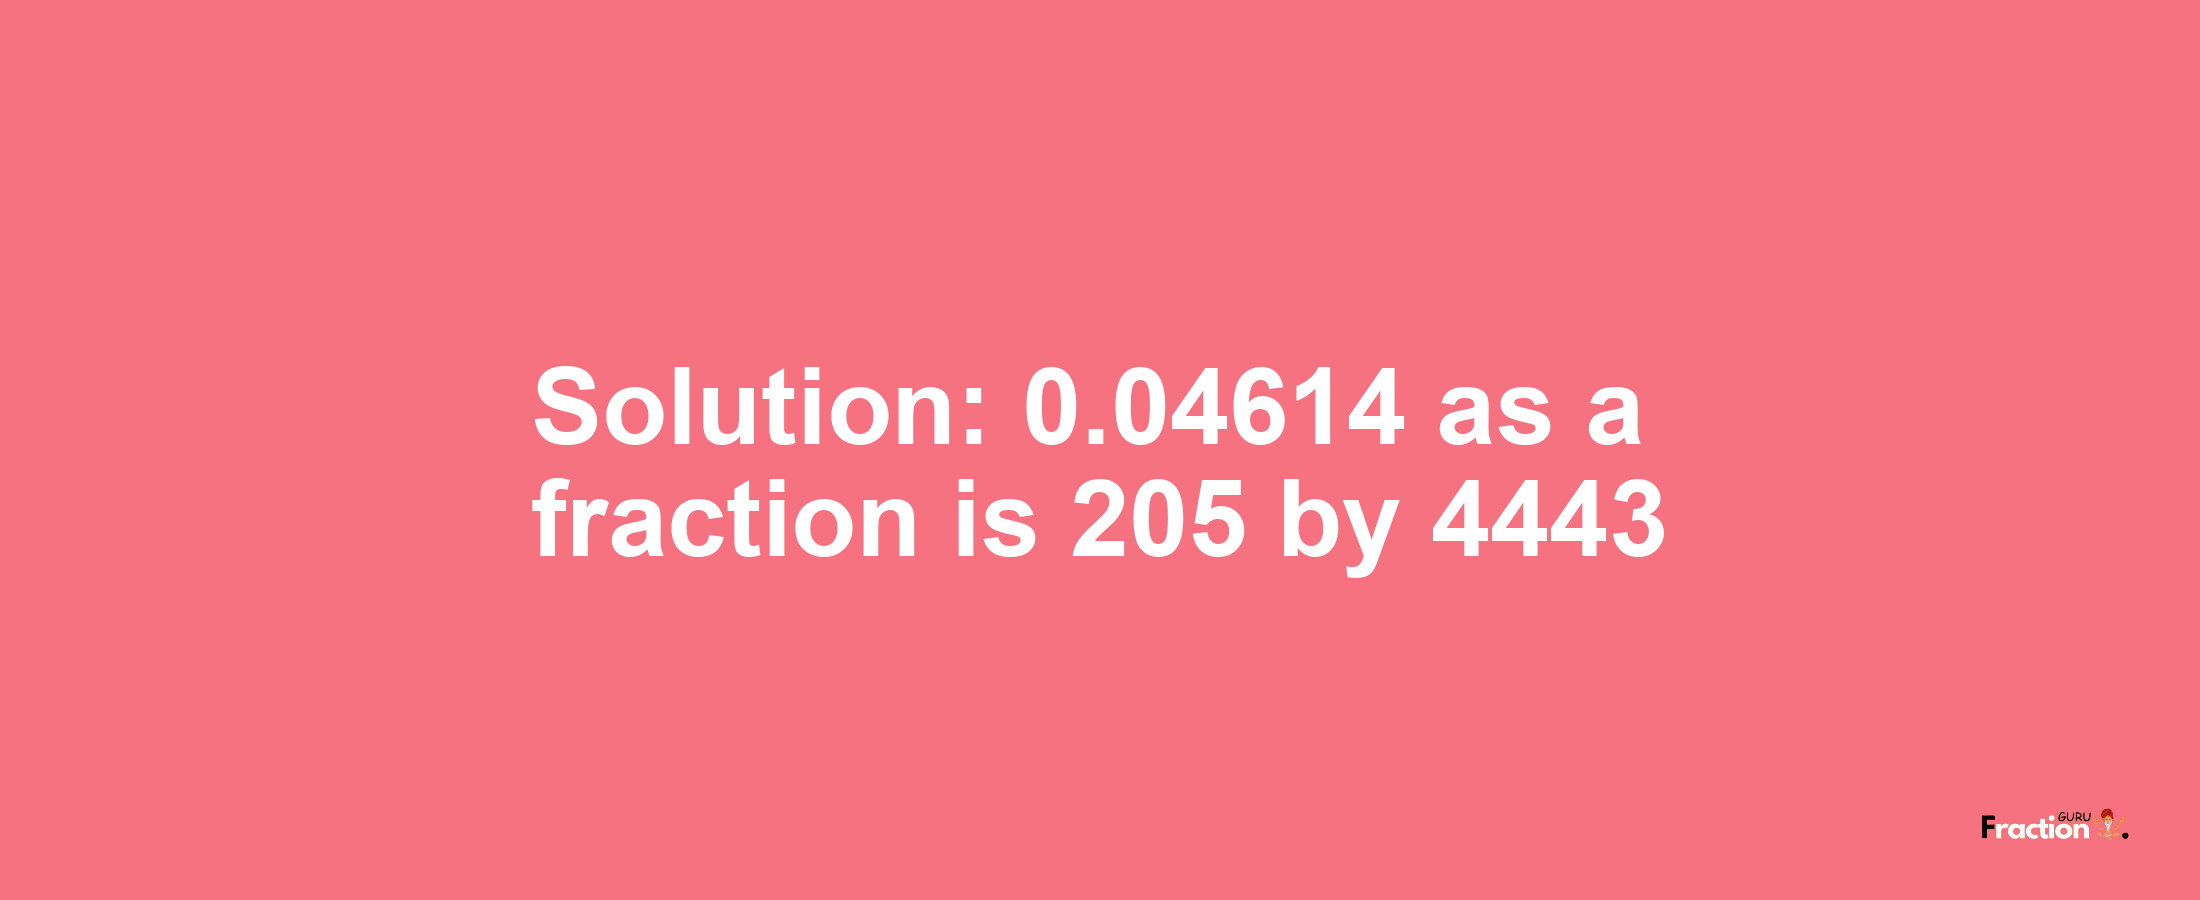 Solution:0.04614 as a fraction is 205/4443